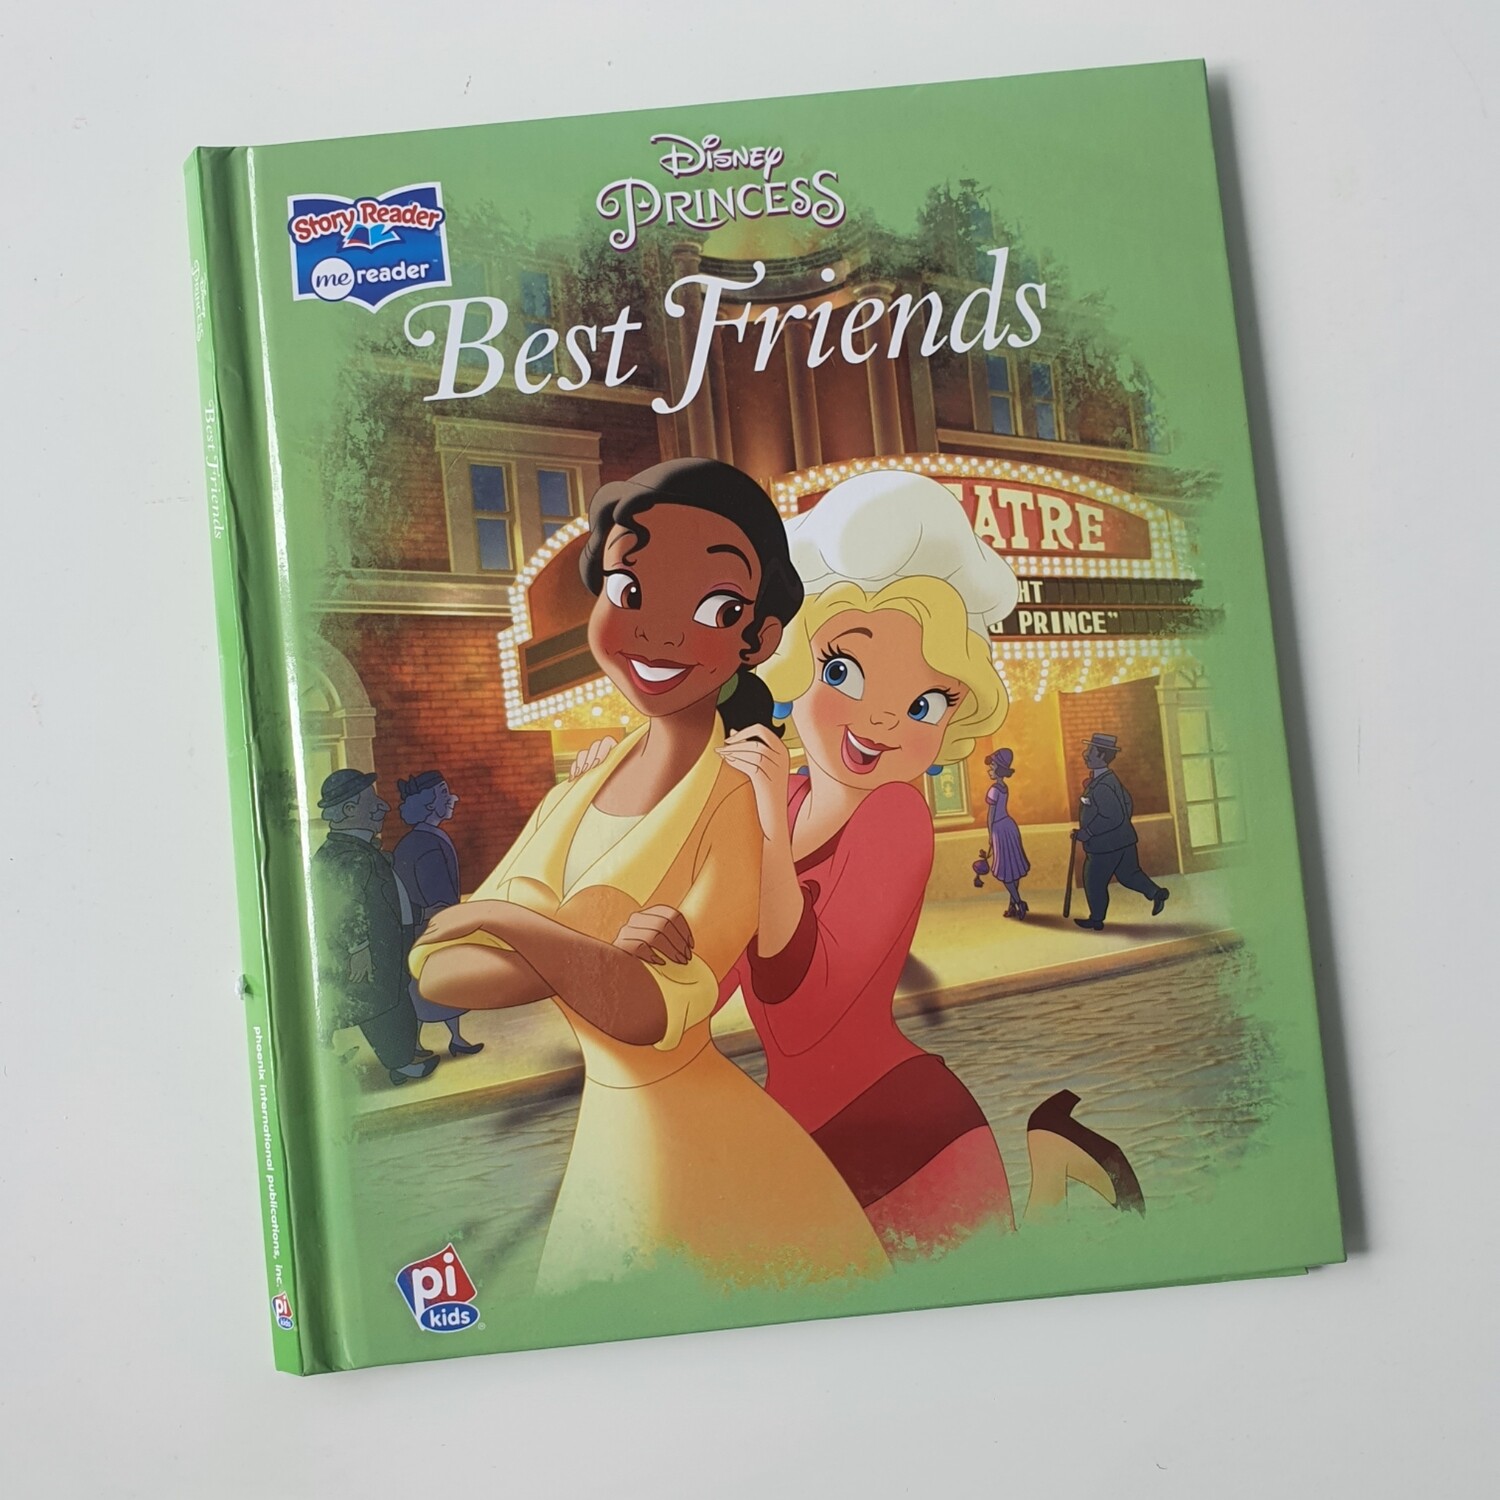 Best Friends - Tiana, Princess and the Frog